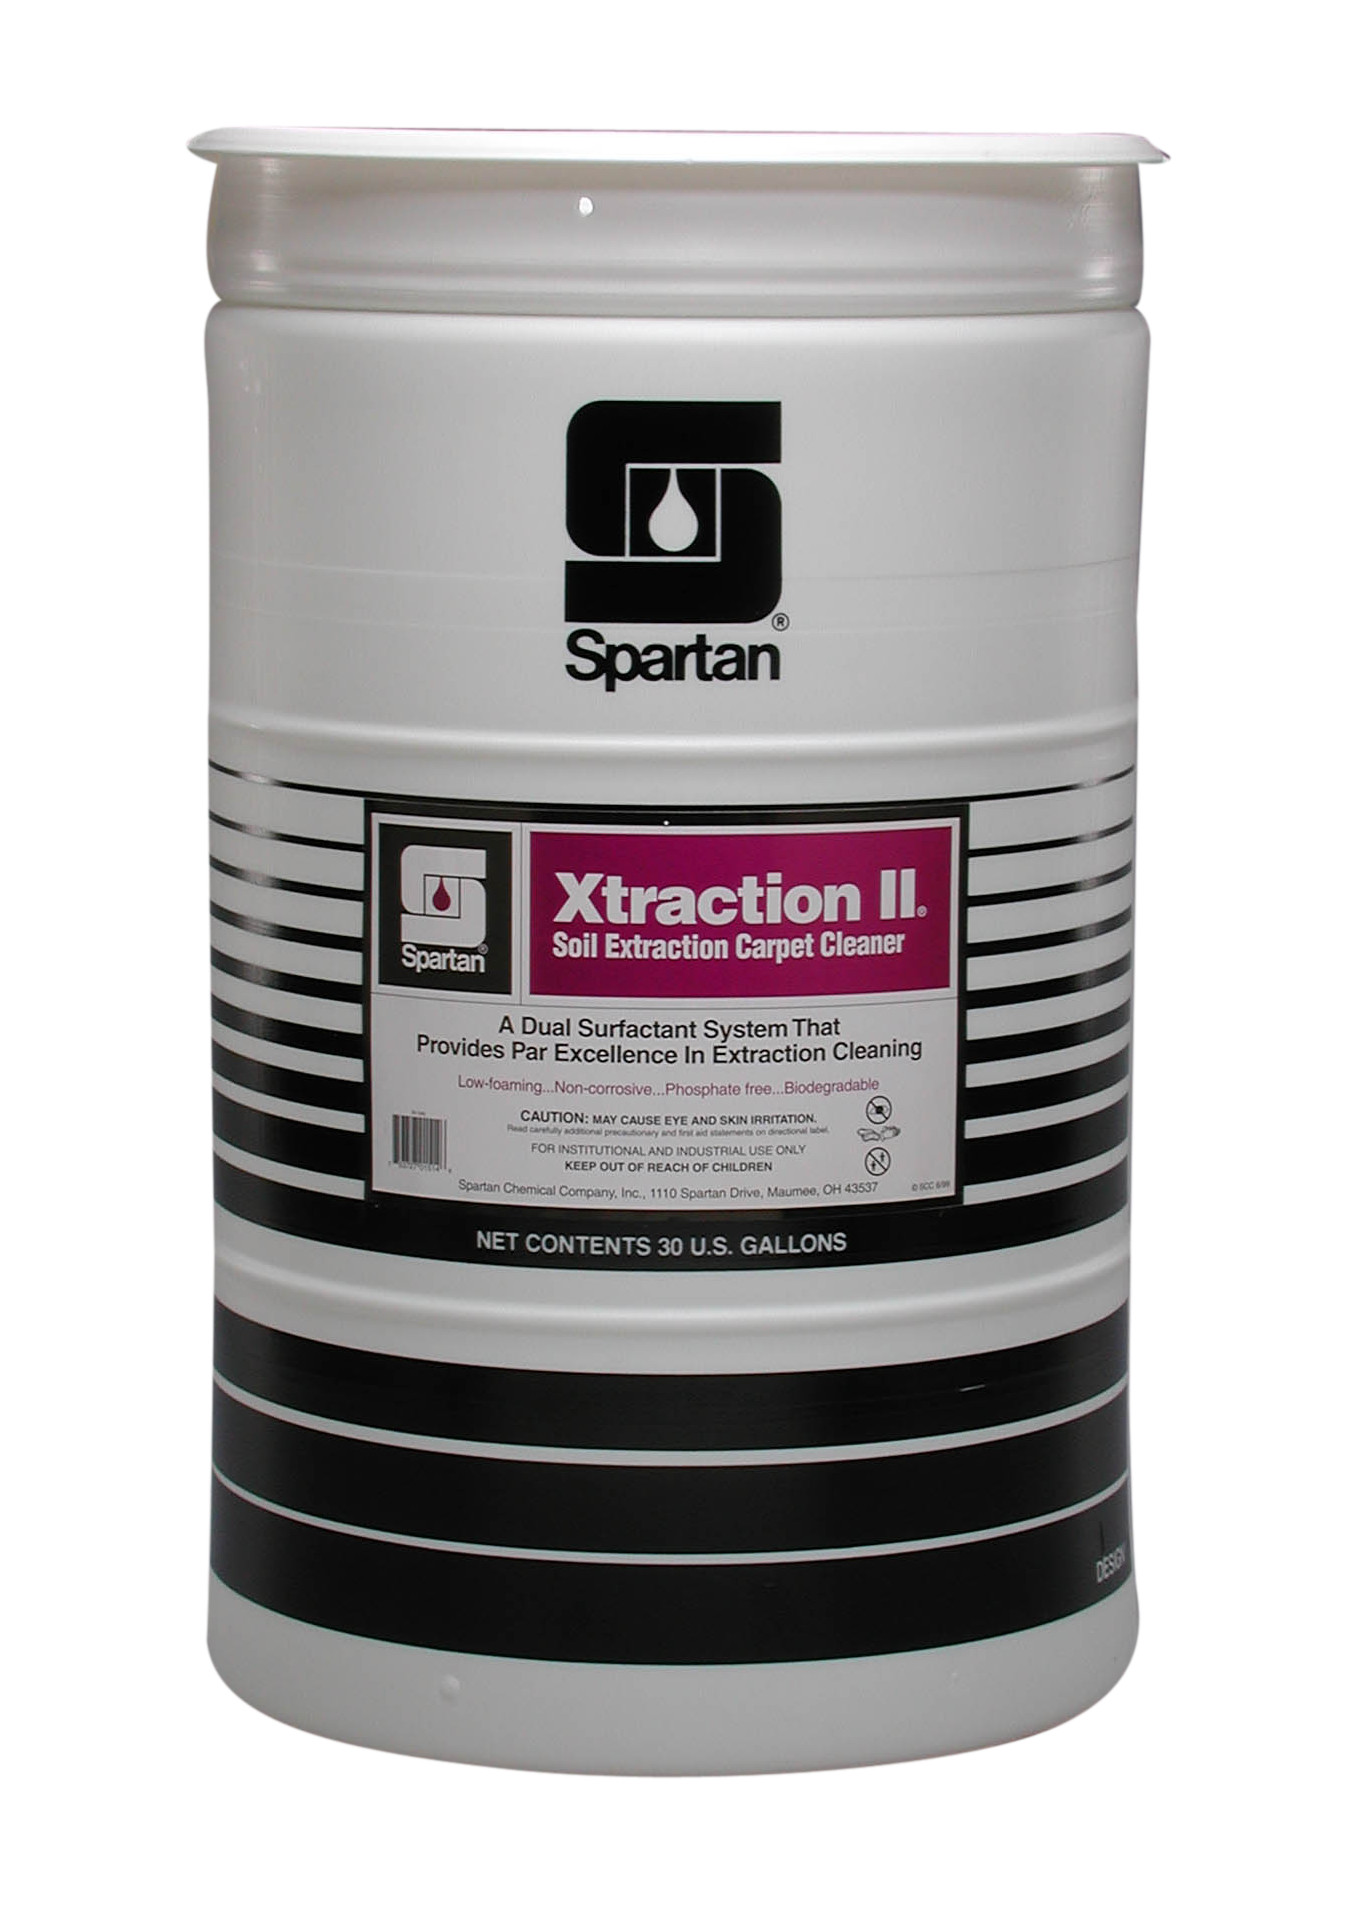 Spartan Chemical Company Xtraction II, 30 GAL DRUM